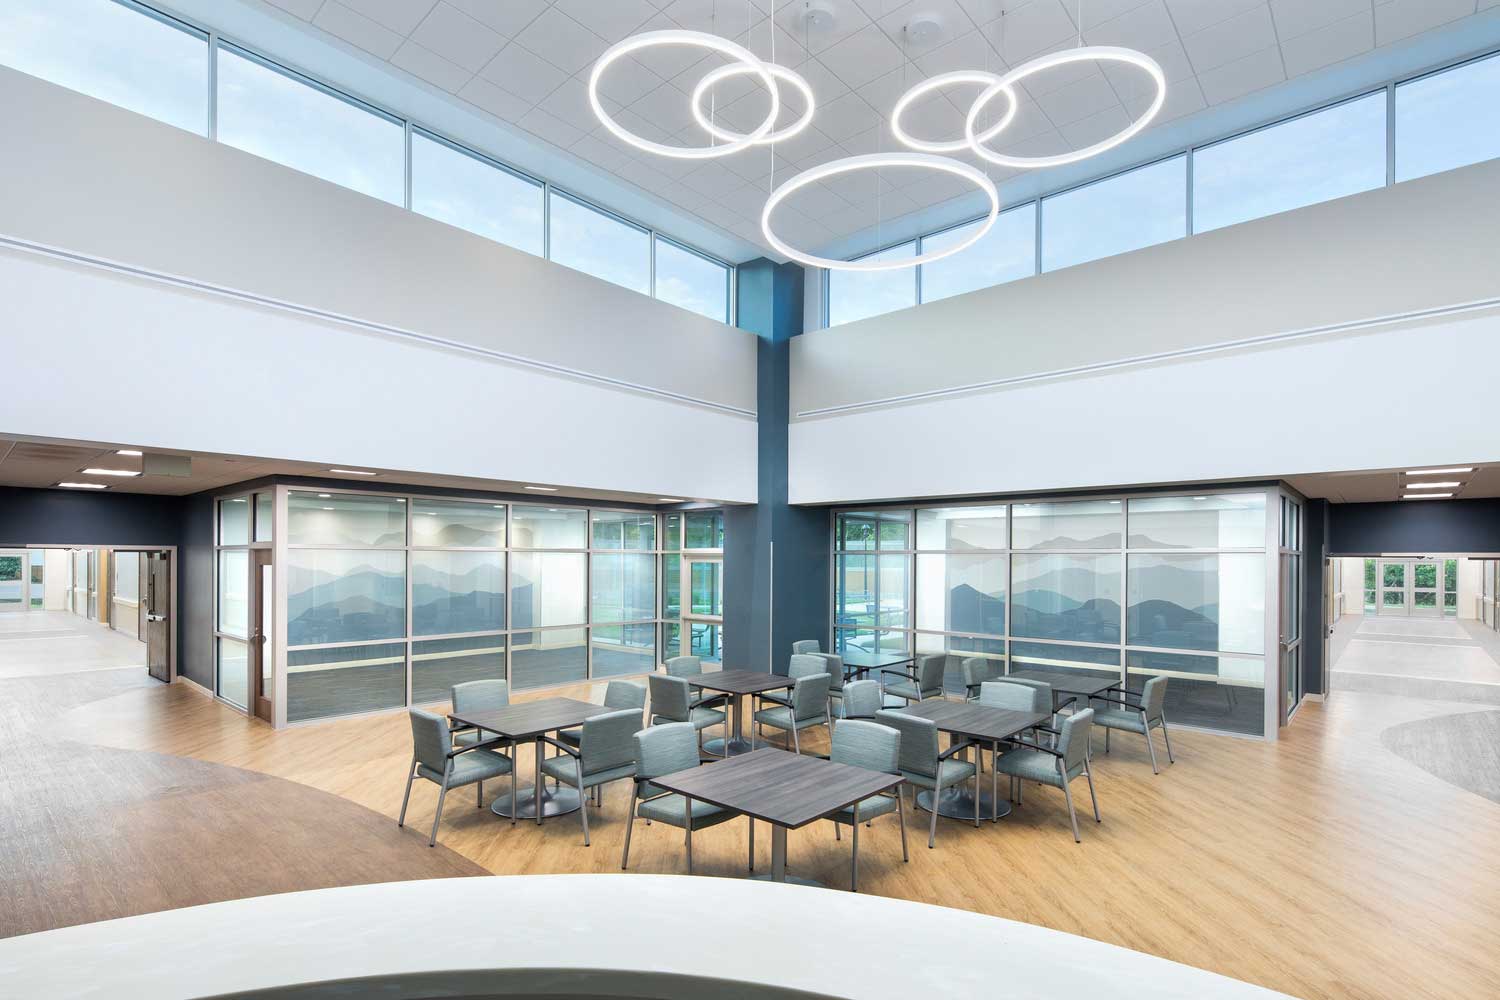 Image shows Design for the 21,680 sq. ft. Jonas Hill Hospital and Behavioral Health Clinic in Lenoir, NC, emphasizes community awareness and patient dignity. Lighting design provides a pleasing, non-institutional atmosphere for patients, while the layout features soft hues and natural wood accents that align with tranquil theming intentions.